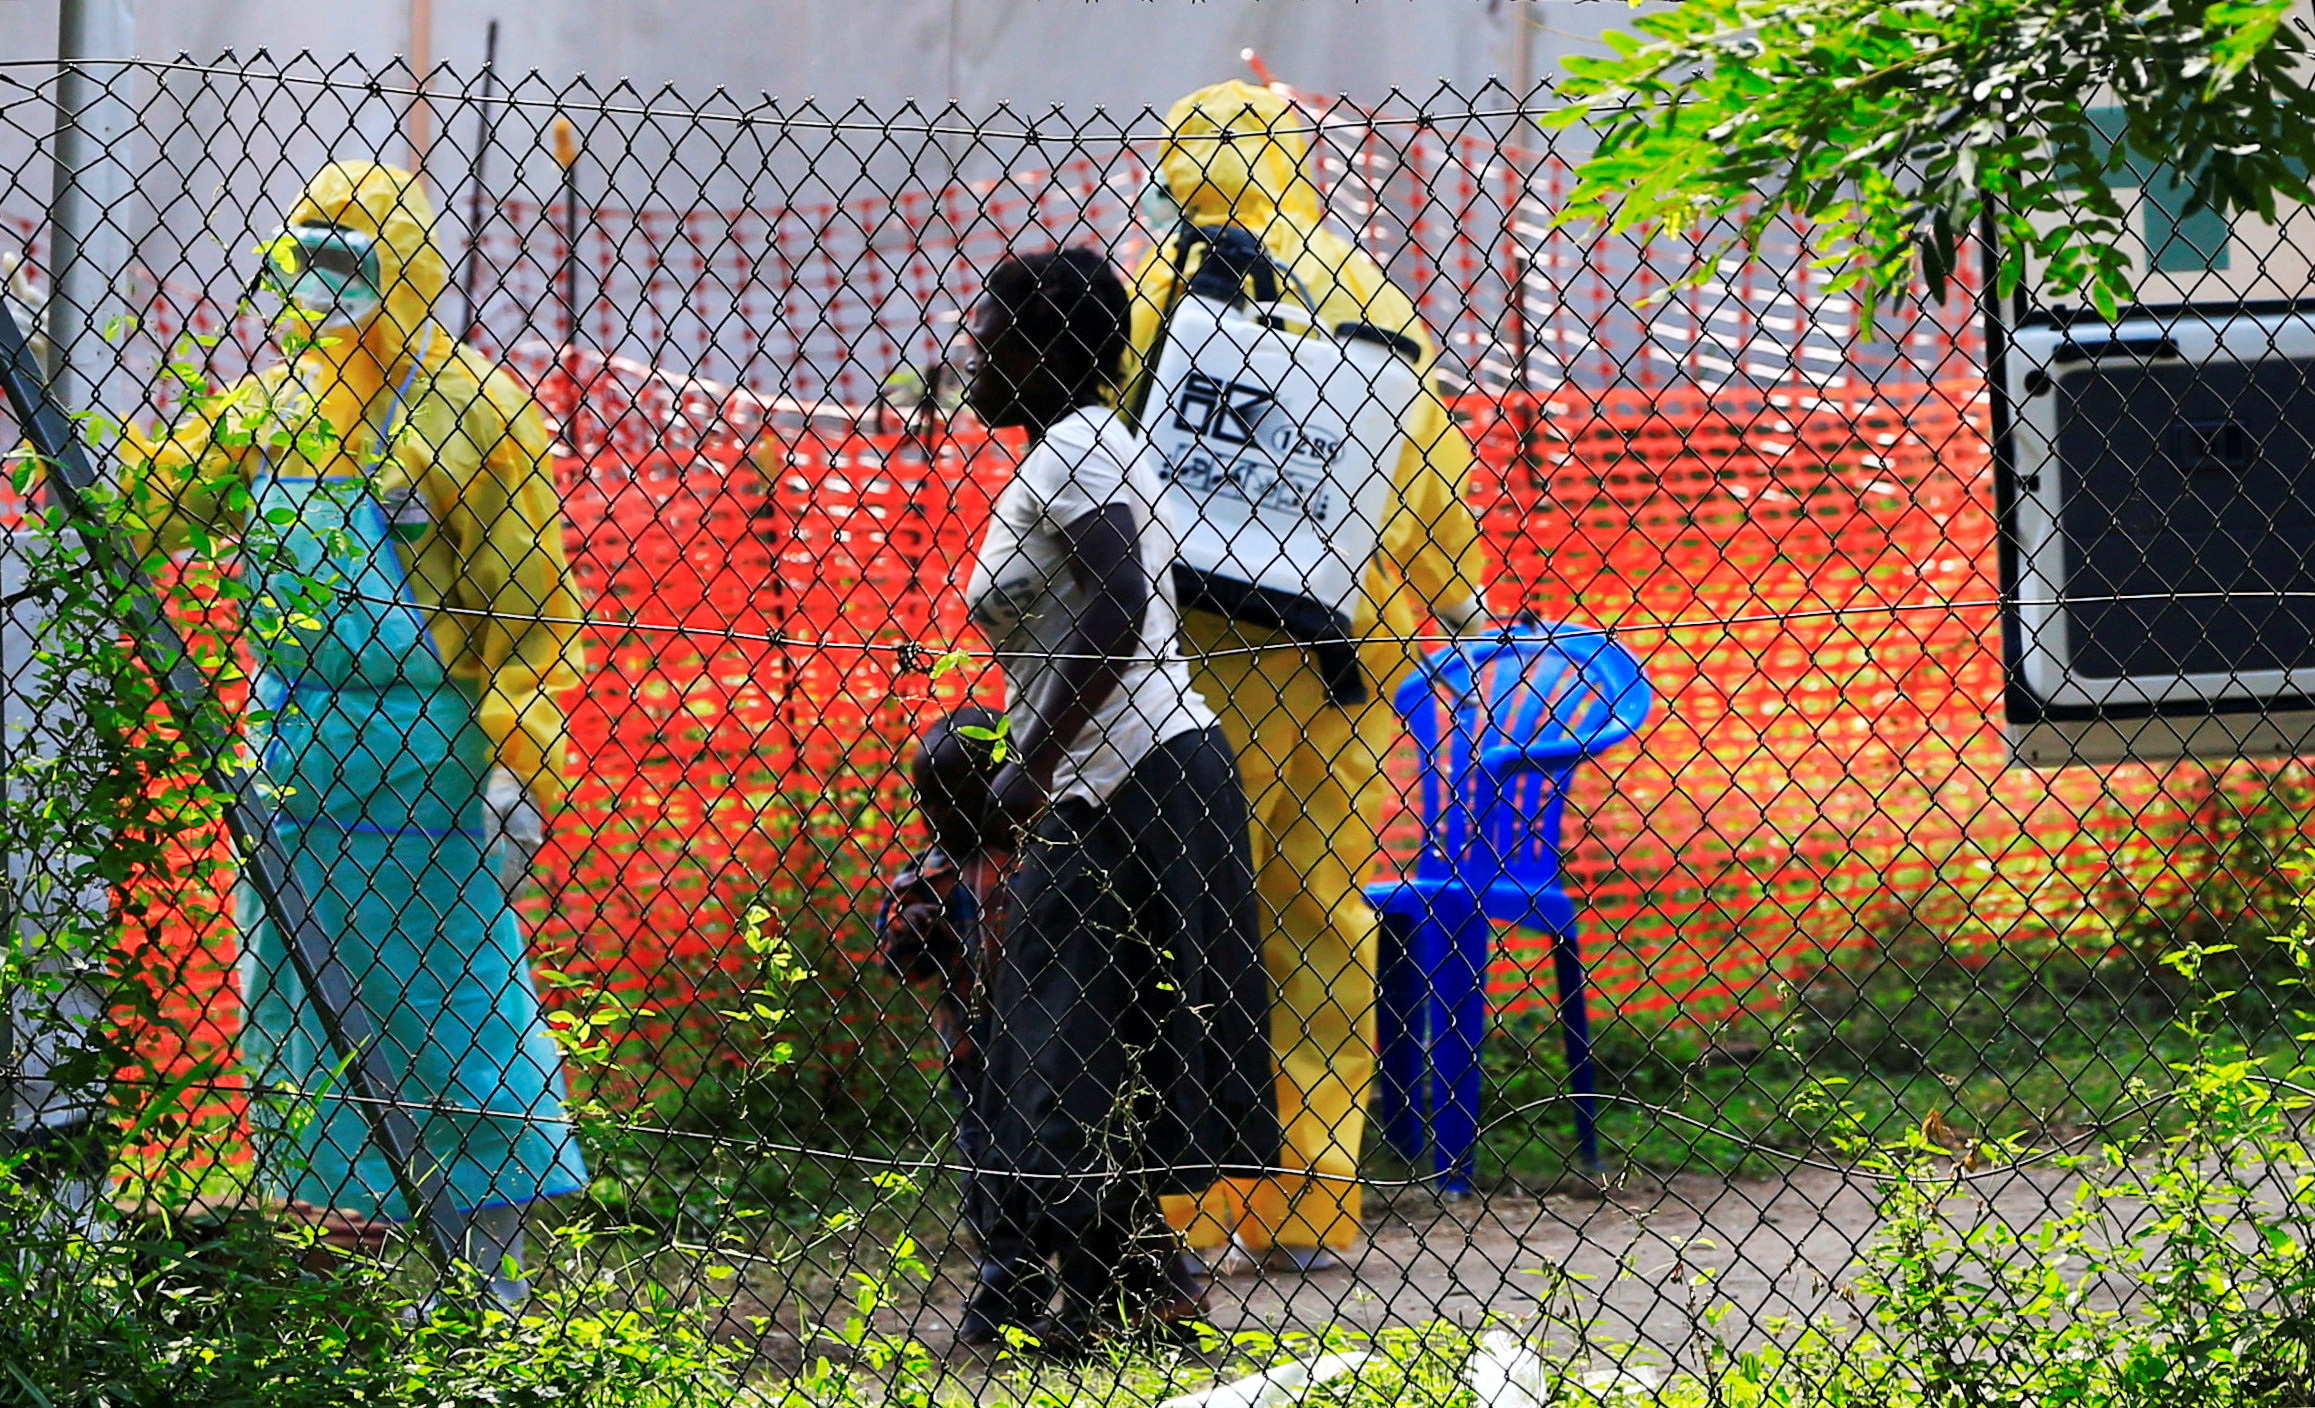 A woman and her child arrive for ebola related investigation at the health facility at the Bwera general hospital near the border with the Democratic Republic of Congo in Bwera